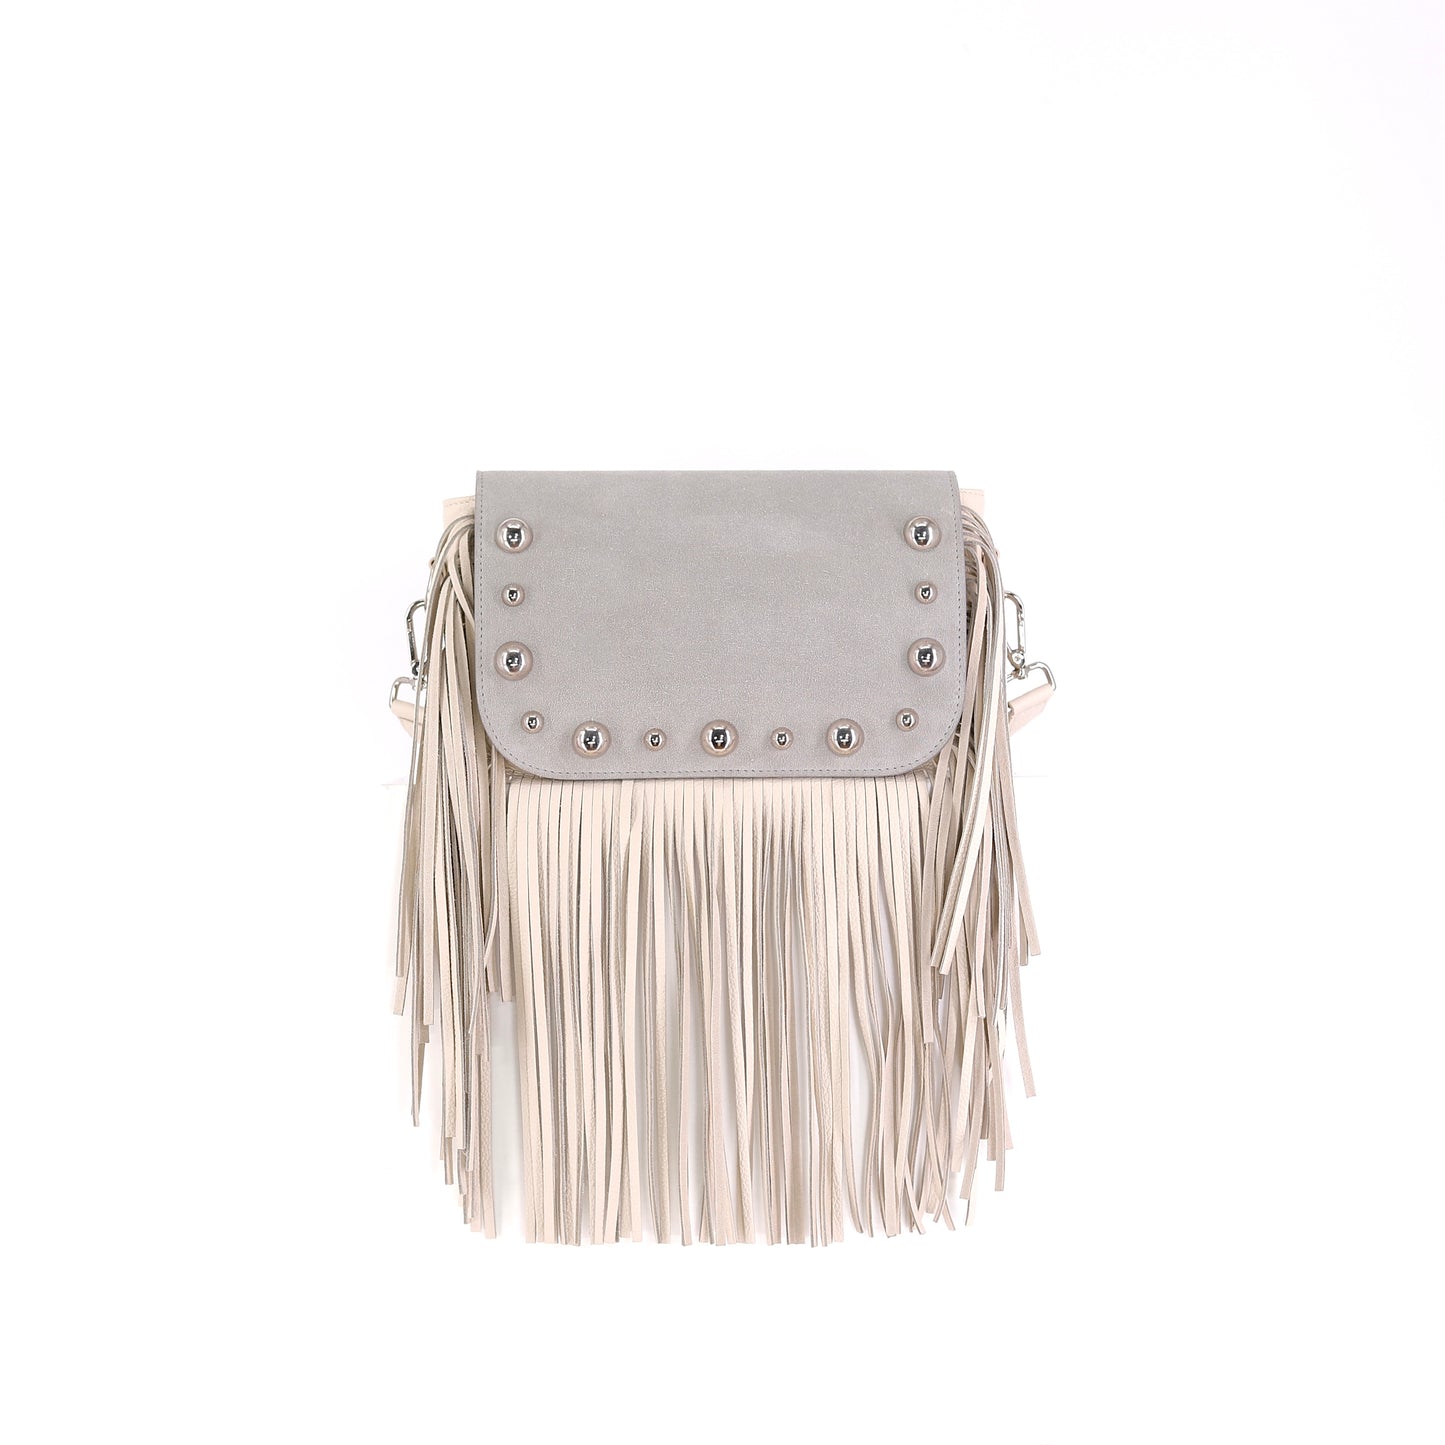 BRONX flap suede leather grey with studs small